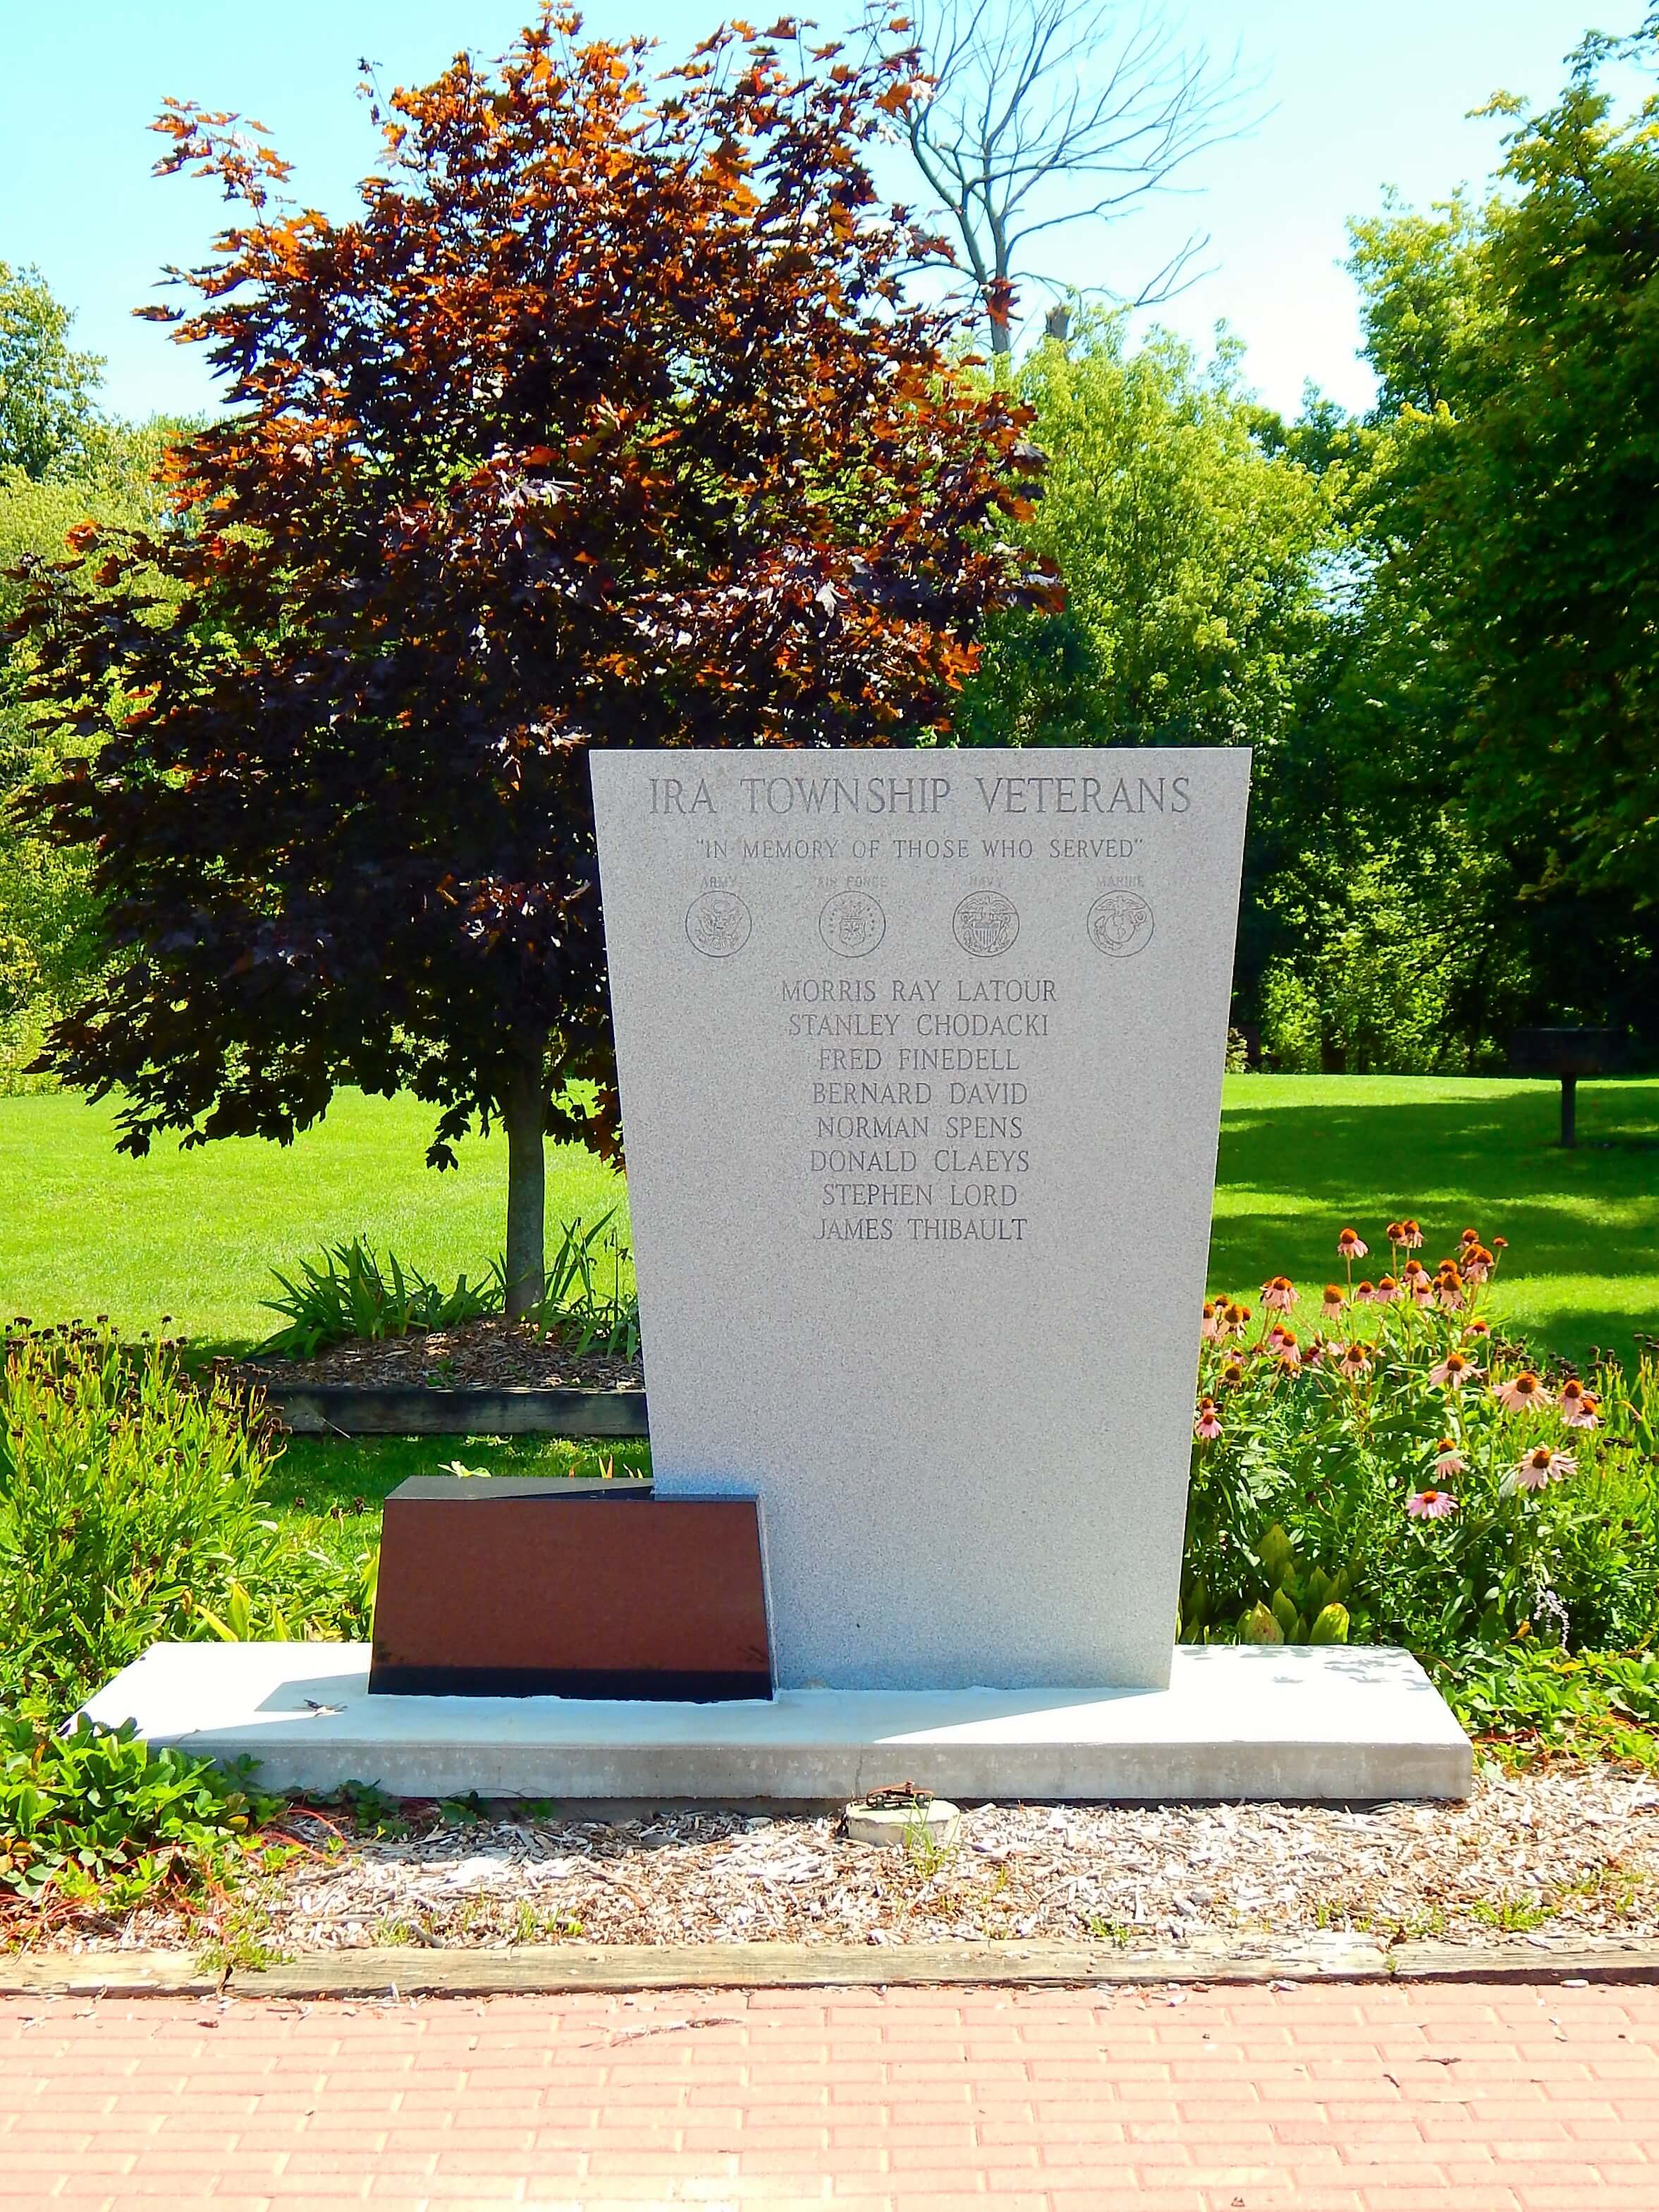 A memorial in a park with a tree in the background.